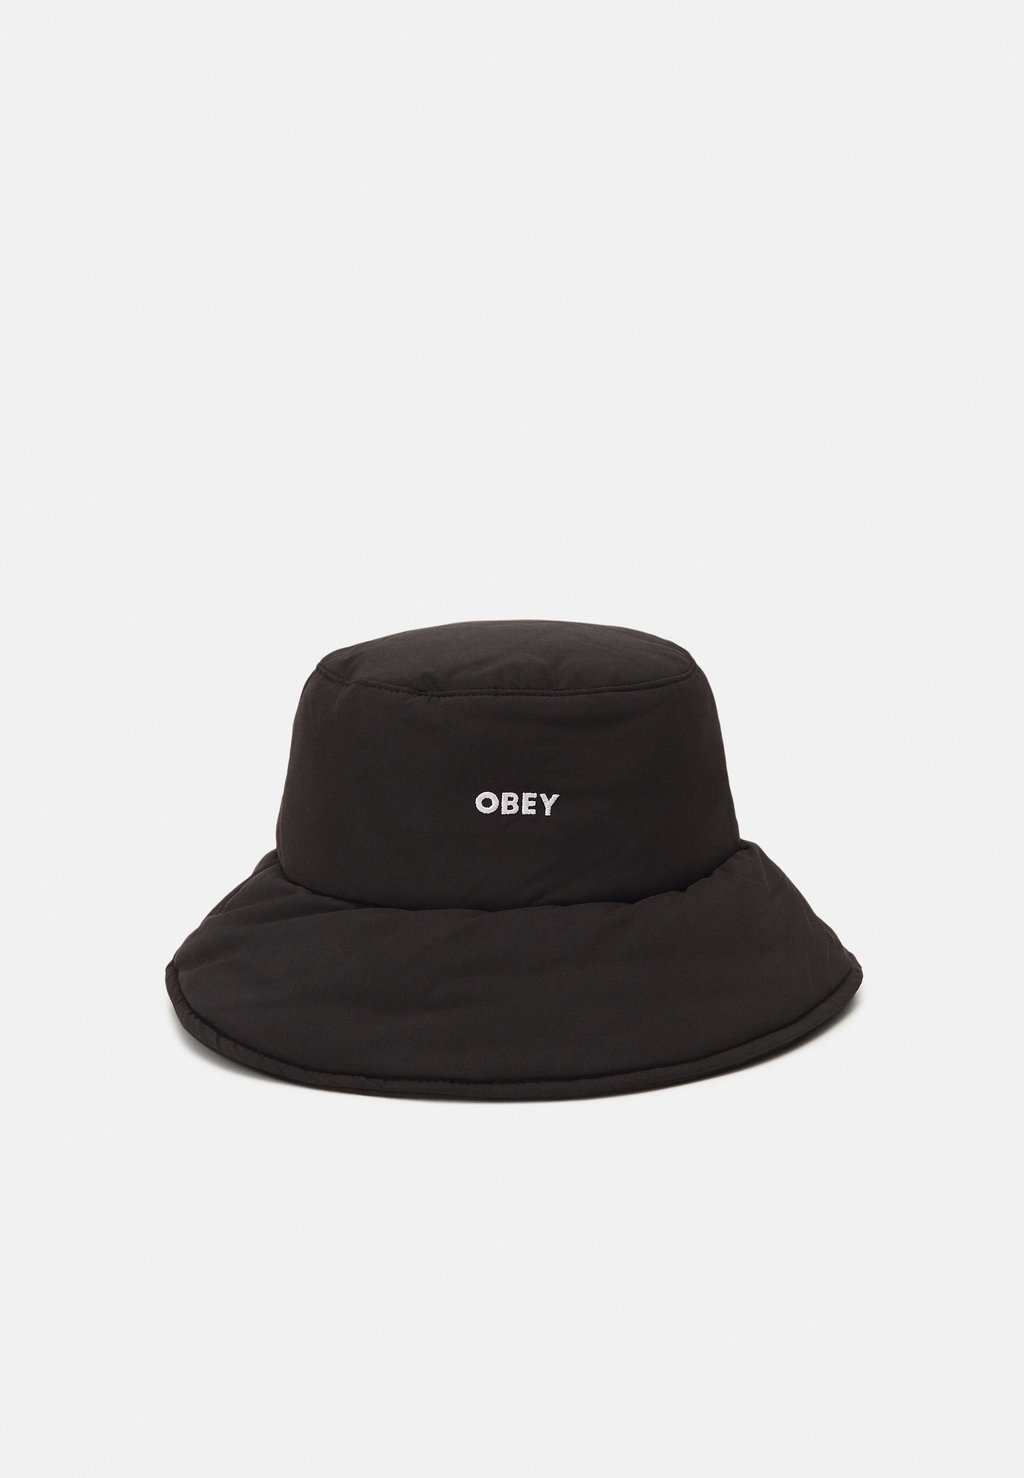 Шапка ONE TWO UNISEX Obey Clothing, черный шапка gemma beanie unisex obey clothing черный